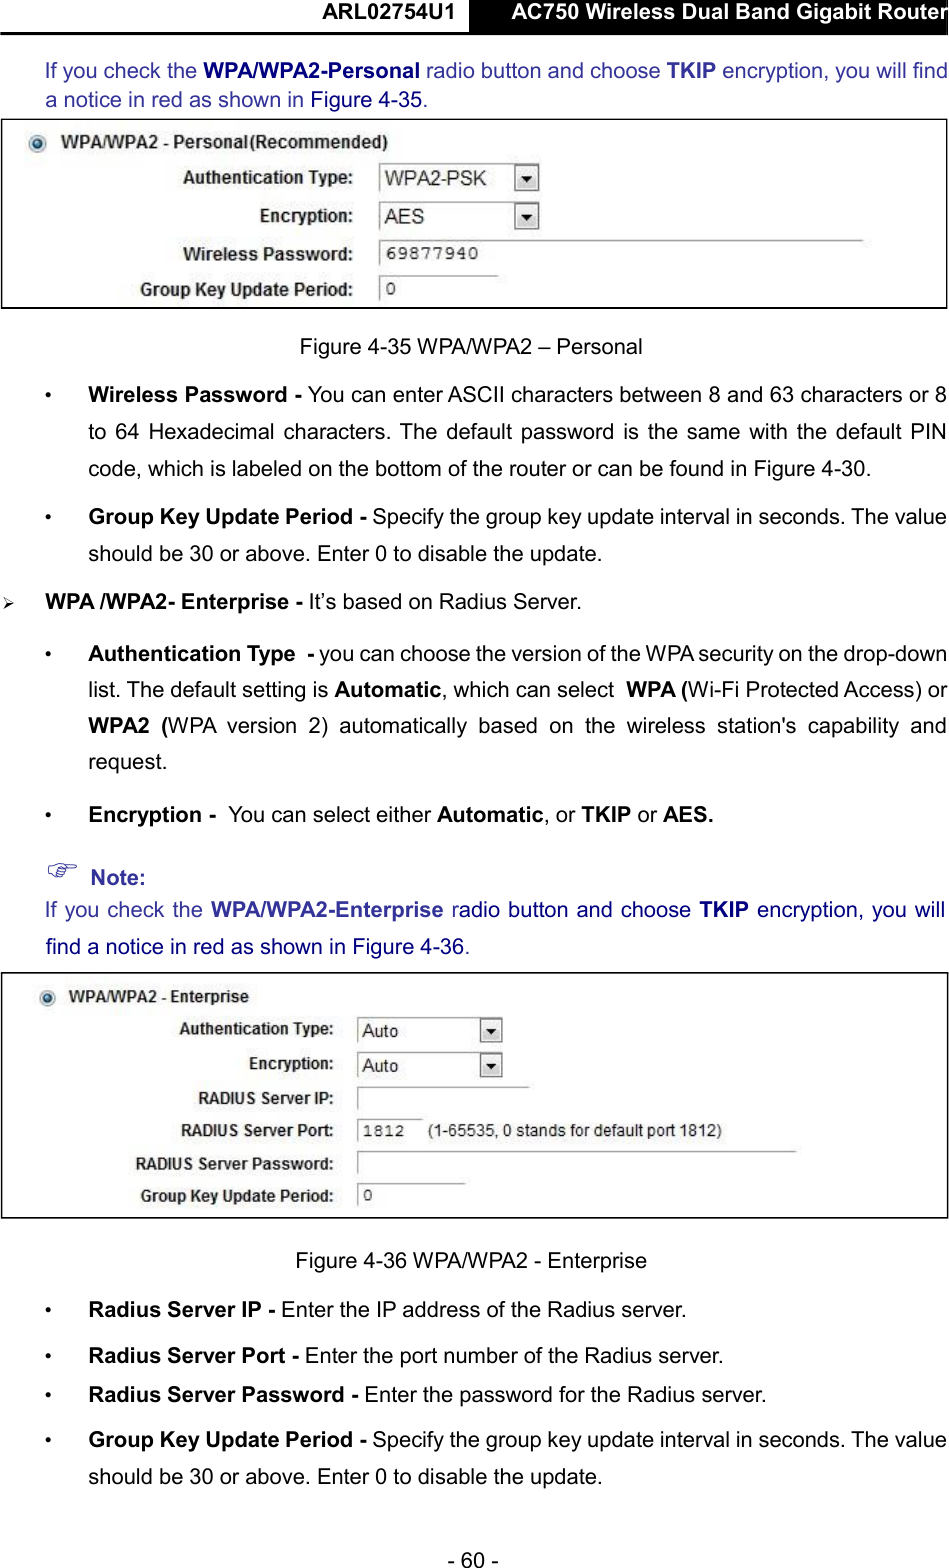  ARL02754U1  AC750 Wireless Dual Band Gigabit Router    - 60 -  If you check the WPA/WPA2-Personal radio button and choose TKIP encryption, you will find a notice in red as shown in Figure 4-35.   Figure 4-35 WPA/WPA2 – Personal  • Wireless Password - You can enter ASCII characters between 8 and 63 characters or 8 to 64 Hexadecimal characters. The default password is the same with the default PIN code, which is labeled on the bottom of the router or can be found in Figure 4-30.  • Group Key Update Period - Specify the group key update interval in seconds. The value should be 30 or above. Enter 0 to disable the update.   WPA /WPA2- Enterprise - It’s based on Radius Server.  • Authentication Type - you can choose the version of the WPA security on the drop-down list. The default setting is Automatic, which can select WPA (Wi-Fi Protected Access) or WPA2  (WPA  version  2)  automatically  based  on  the  wireless  station&apos;s  capability  and request.  • Encryption - You can select either Automatic, or TKIP or AES.   Note:  If you check the WPA/WPA2-Enterprise radio button and choose TKIP encryption, you will find a notice in red as shown in Figure 4-36.   Figure 4-36 WPA/WPA2 - Enterprise  • Radius Server IP - Enter the IP address of the Radius server.  • Radius Server Port - Enter the port number of the Radius server.  • Radius Server Password - Enter the password for the Radius server.  • Group Key Update Period - Specify the group key update interval in seconds. The value should be 30 or above. Enter 0 to disable the update.      